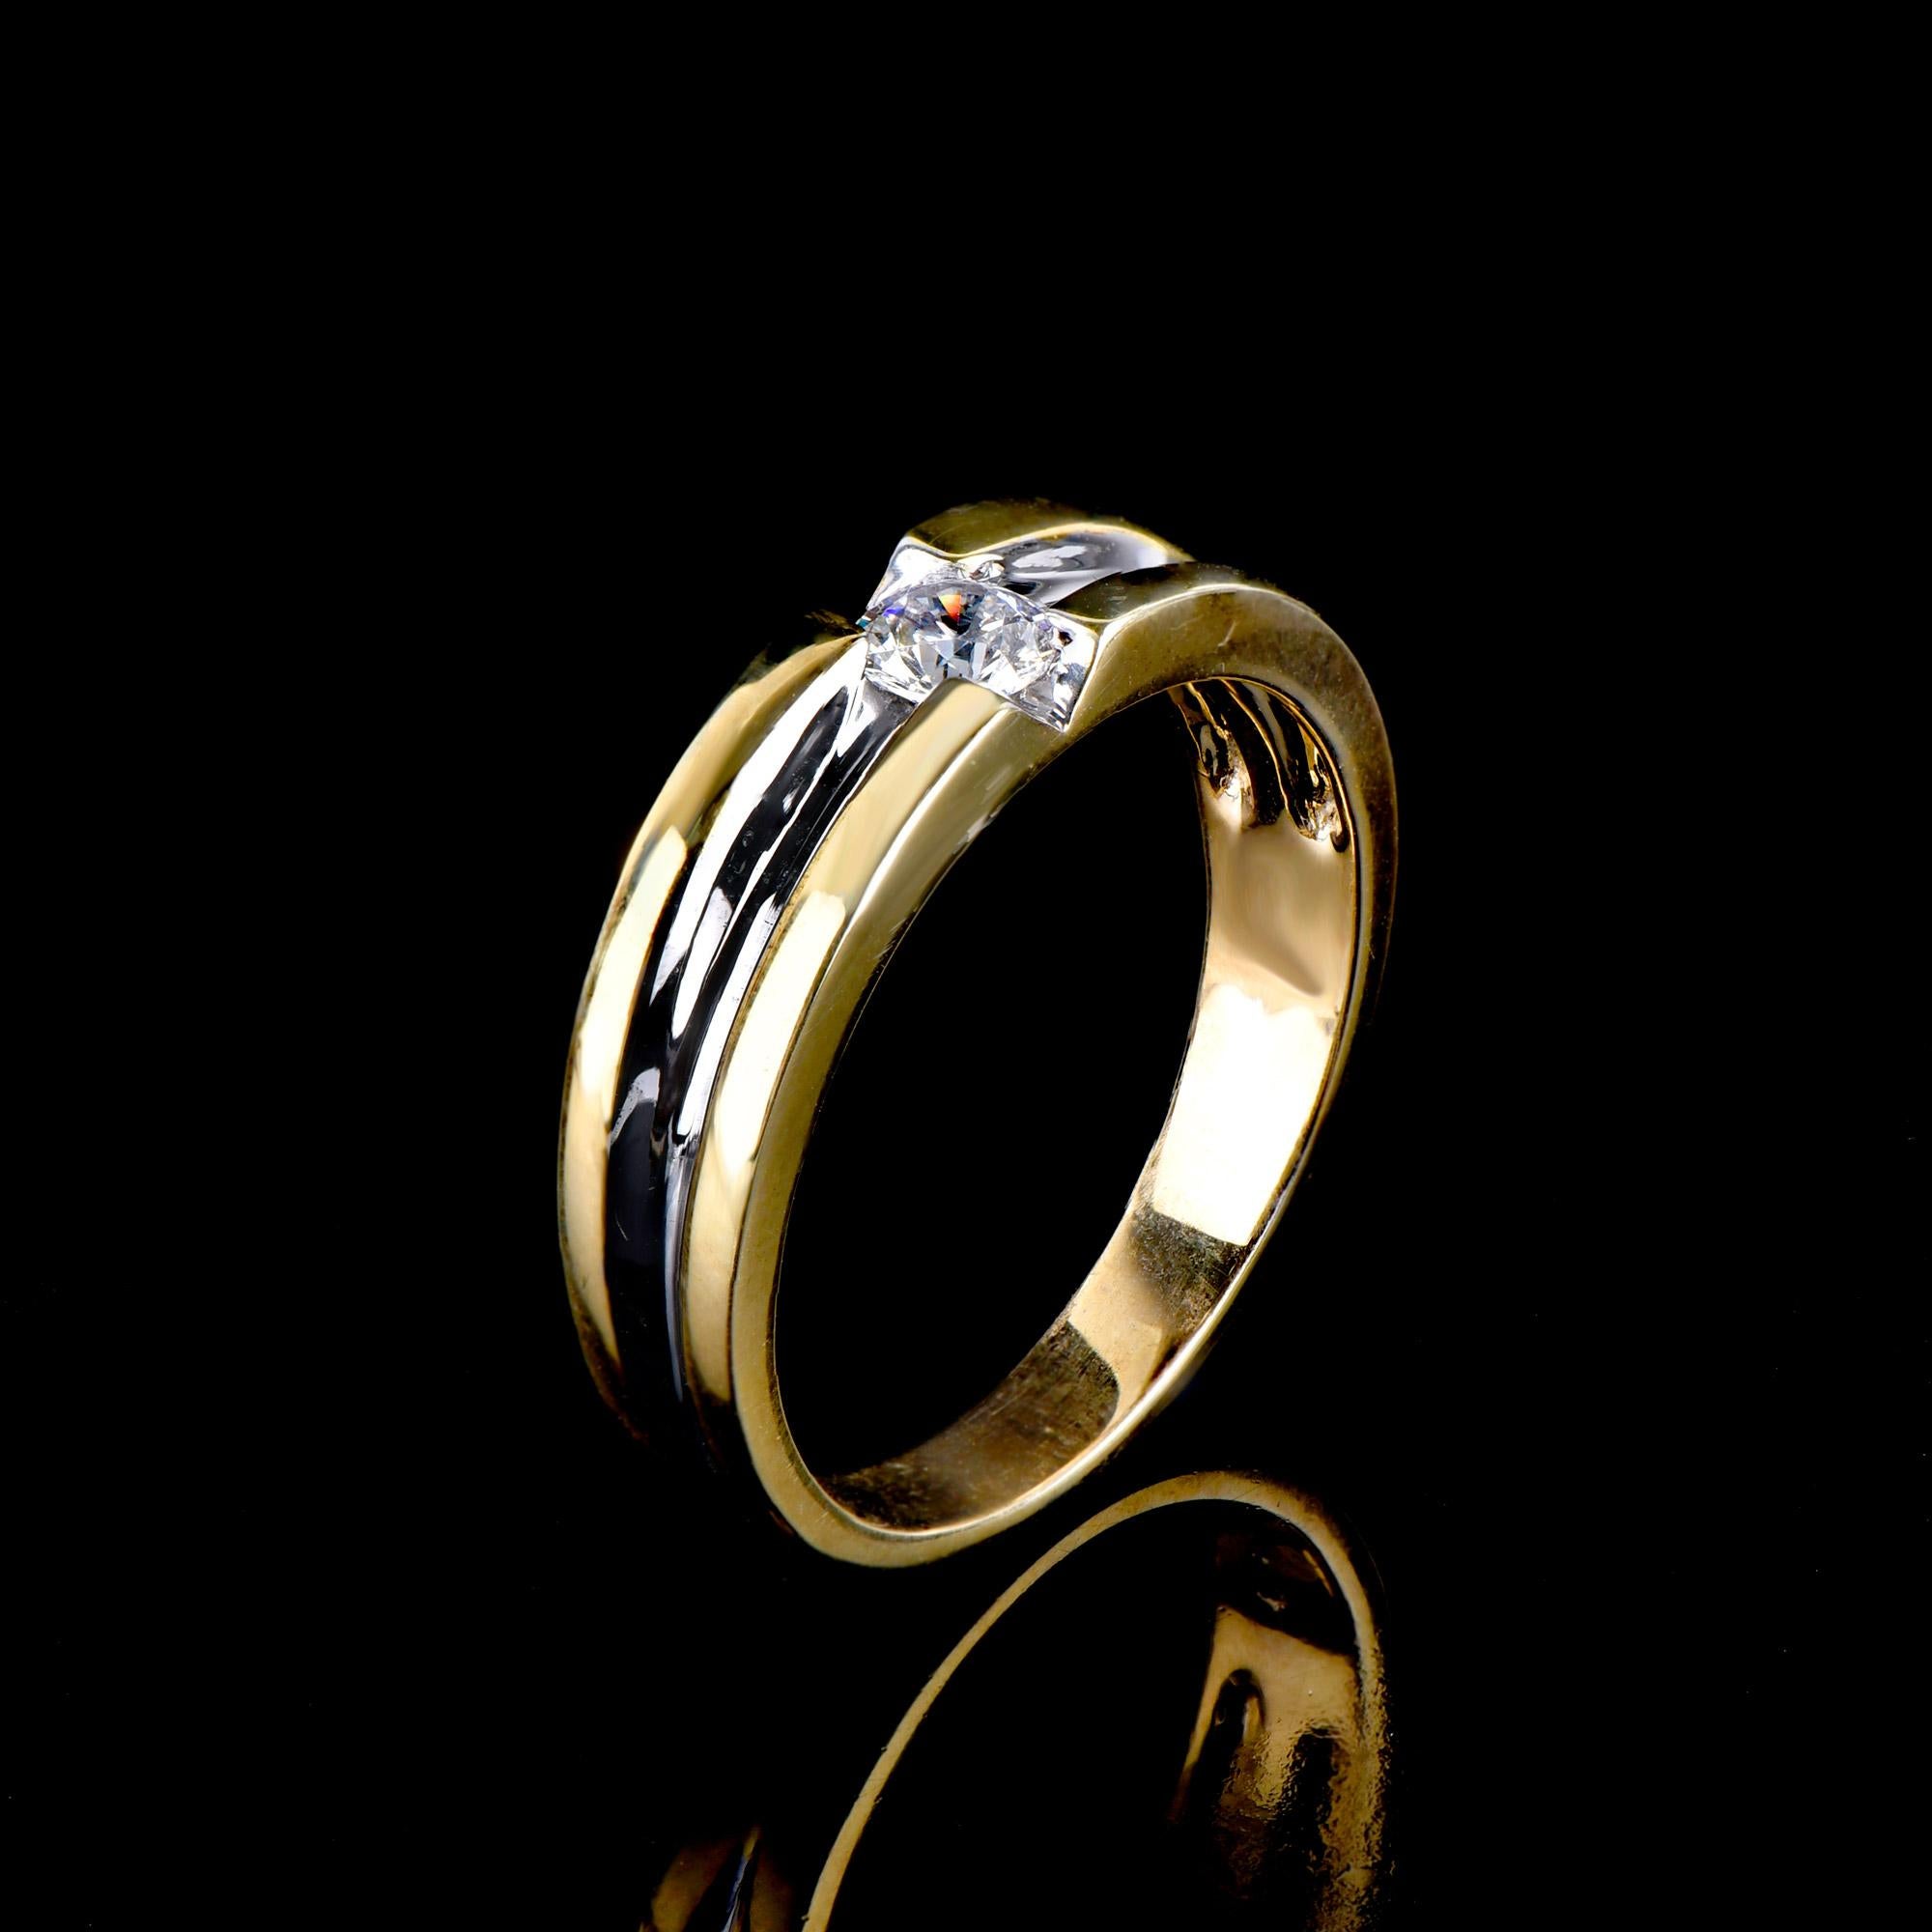 One Simple Exquisite Stone crafted in 18K Yellow gold Two-Tone plated with 1 centre stone of 0.33 carat diamond band ring. Expertly Crafted of sparkling solid white and yellow gold in high polish finish and set with 1 sparkling round white diamond